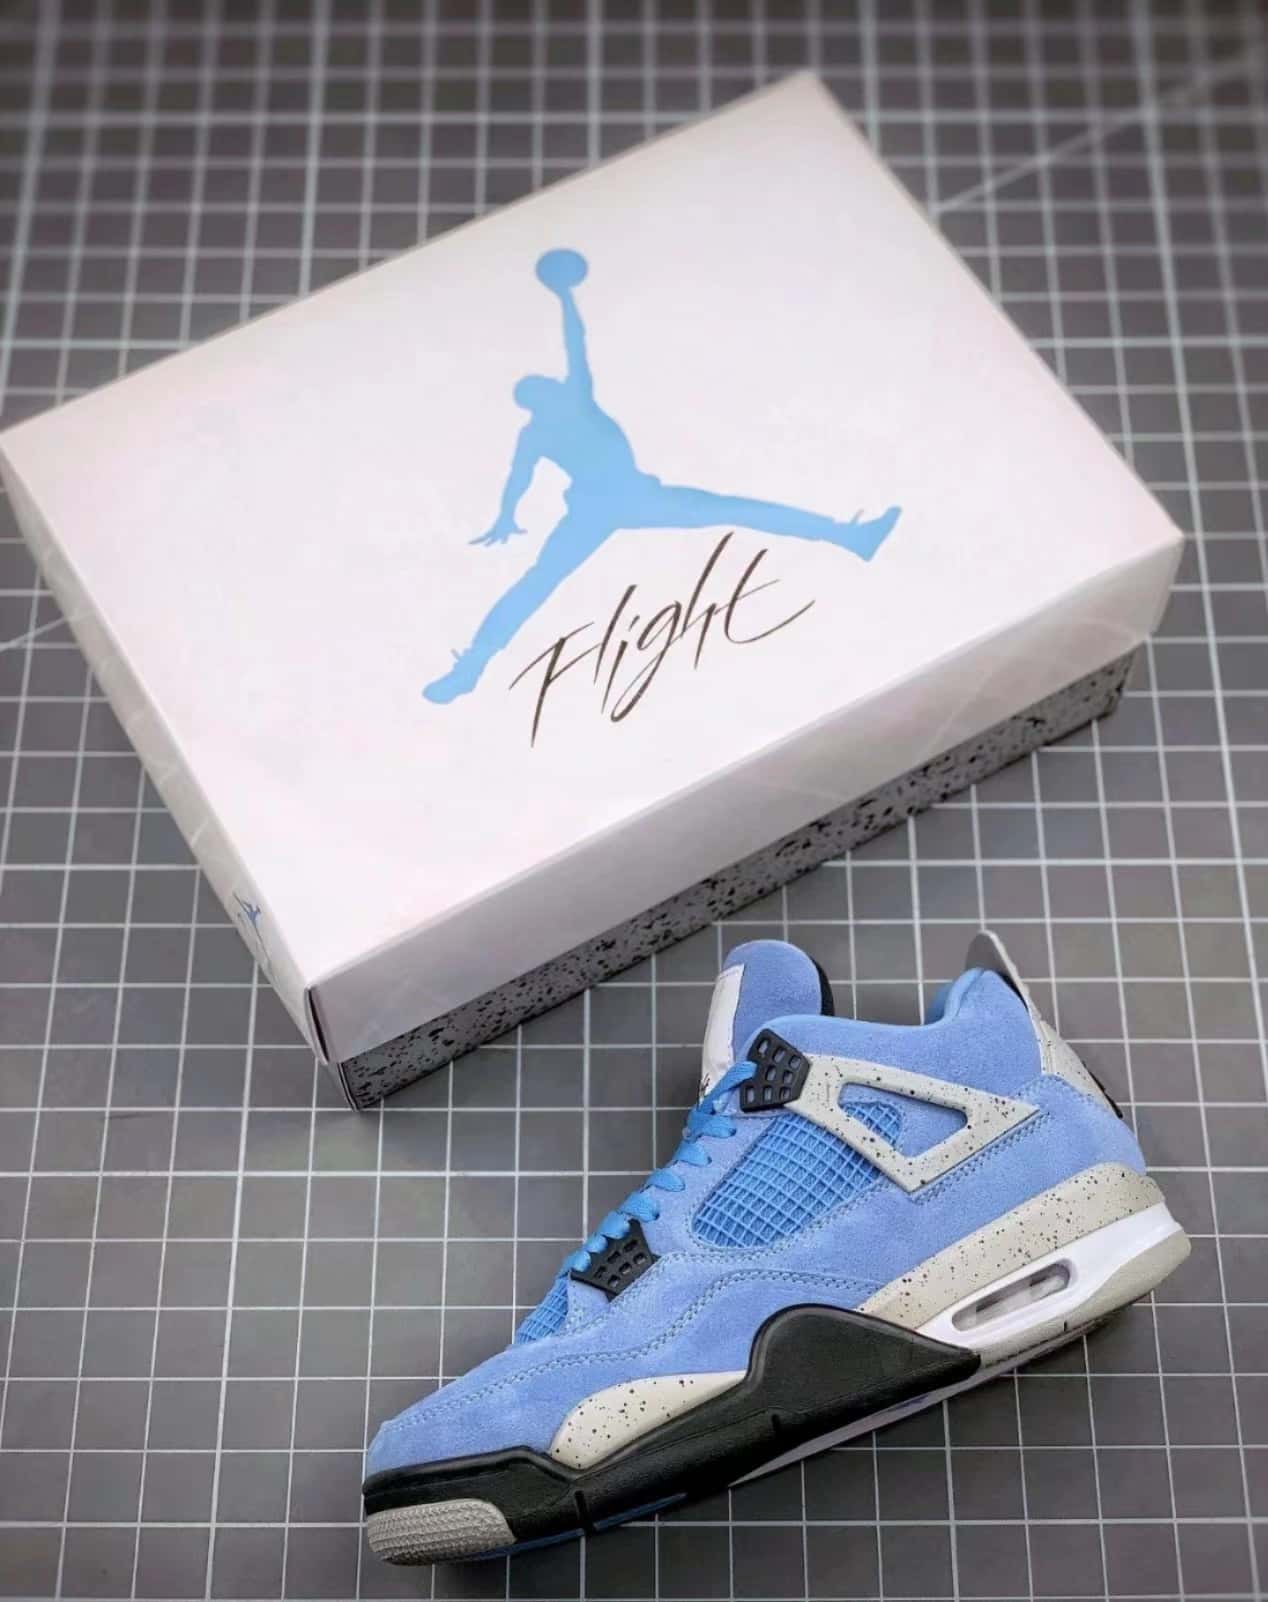 Experience Unmatched Style with Jordan 4 University Blue Reps at Redi Kicks!